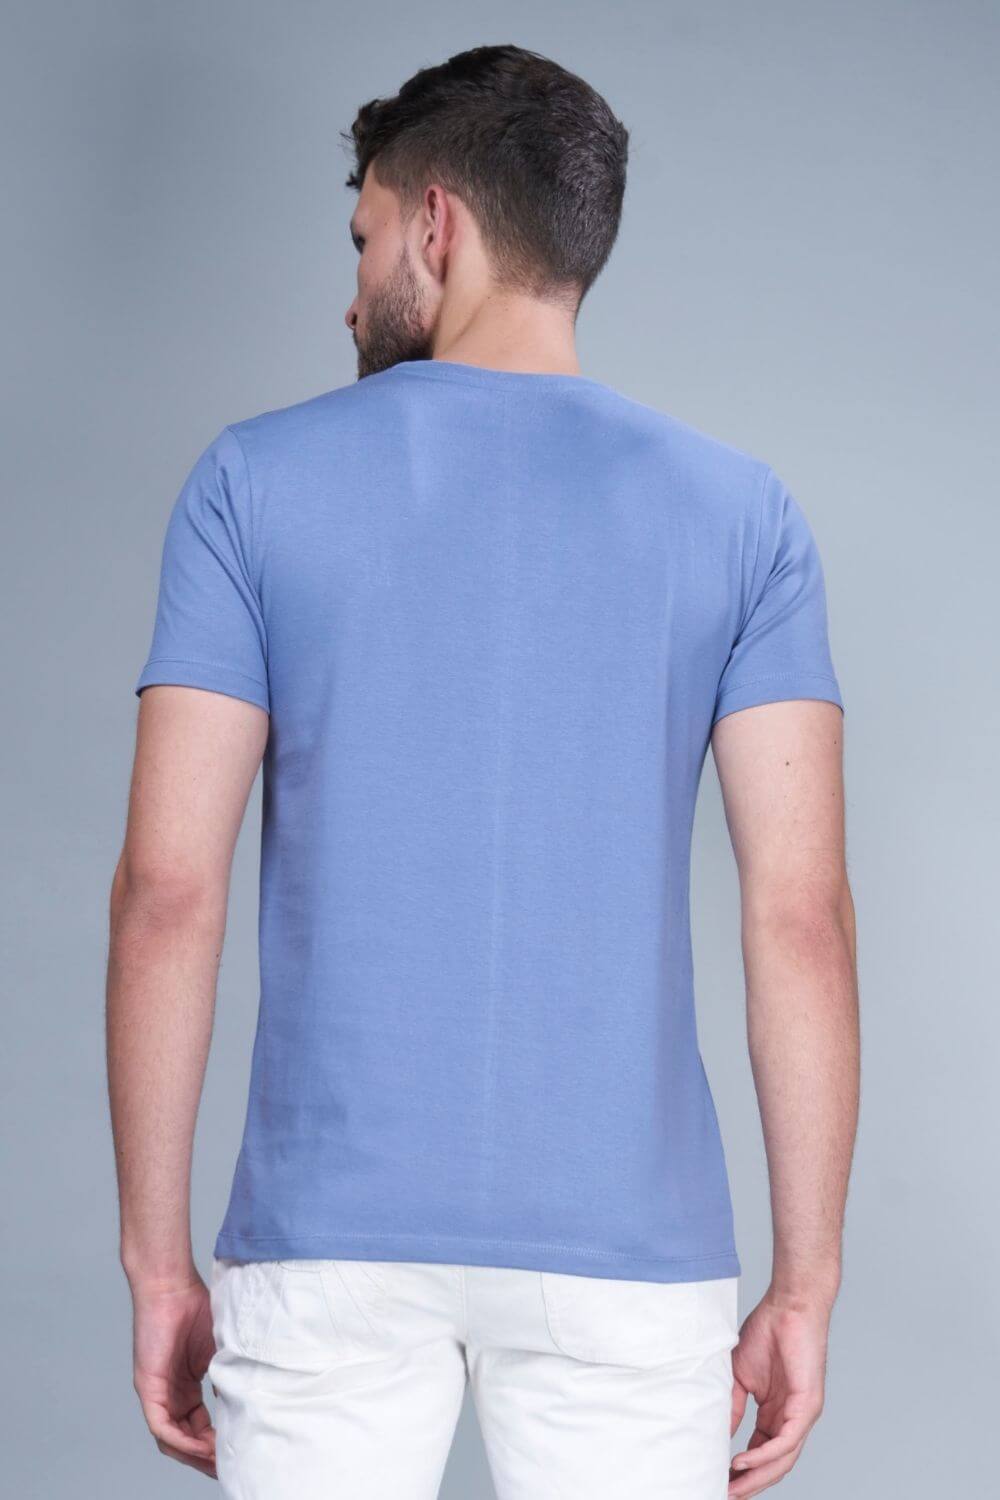 Blue colored, cotton solid T shirt for men with half sleeves and round neck from vibgyor series collection, back view.